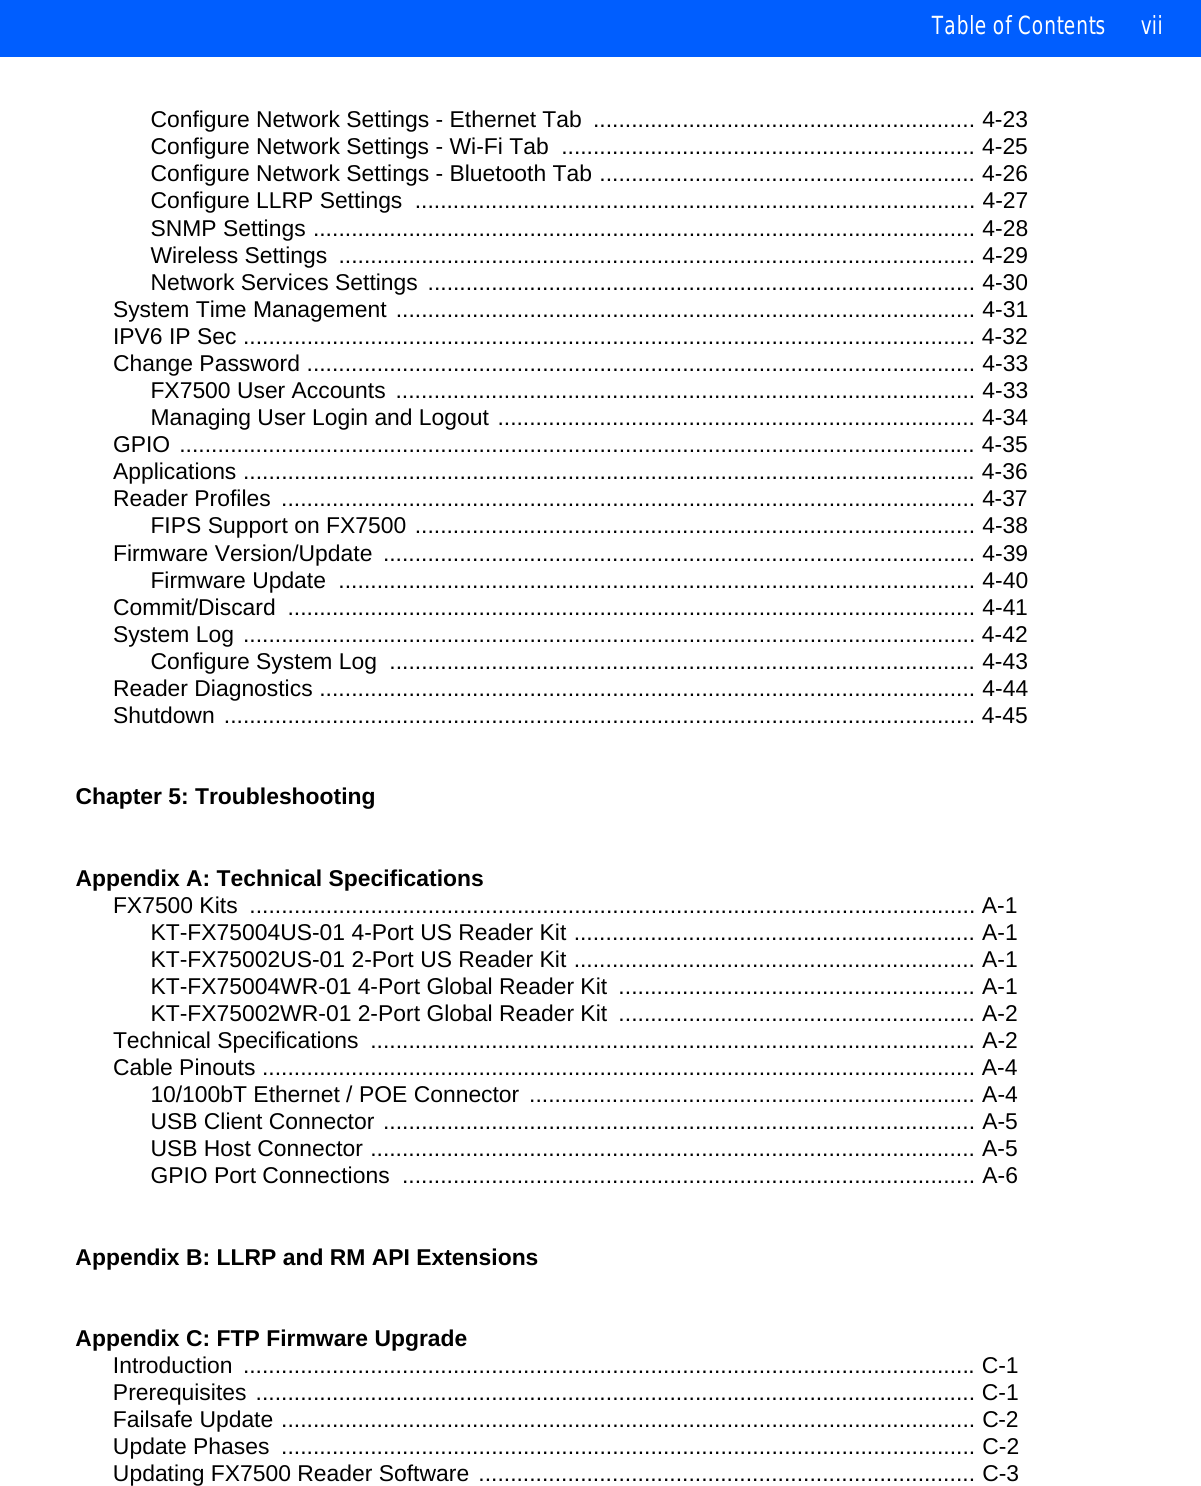 Table of Contents viiConfigure Network Settings - Ethernet Tab  ............................................................ 4-23Configure Network Settings - Wi-Fi Tab  ................................................................. 4-25Configure Network Settings - Bluetooth Tab ........................................................... 4-26Configure LLRP Settings  ........................................................................................ 4-27SNMP Settings ........................................................................................................ 4-28Wireless Settings  .................................................................................................... 4-29Network Services Settings ...................................................................................... 4-30System Time Management ........................................................................................... 4-31IPV6 IP Sec ................................................................................................................... 4-32Change Password ......................................................................................................... 4-33FX7500 User Accounts ........................................................................................... 4-33Managing User Login and Logout ........................................................................... 4-34GPIO ............................................................................................................................. 4-35Applications ................................................................................................................... 4-36Reader Profiles  ............................................................................................................. 4-37FIPS Support on FX7500 ........................................................................................ 4-38Firmware Version/Update  ............................................................................................. 4-39Firmware Update  .................................................................................................... 4-40Commit/Discard ............................................................................................................ 4-41System Log ................................................................................................................... 4-42Configure System Log  ............................................................................................ 4-43Reader Diagnostics ....................................................................................................... 4-44Shutdown ...................................................................................................................... 4-45Chapter 5: TroubleshootingAppendix A: Technical SpecificationsFX7500 Kits  .................................................................................................................. A-1KT-FX75004US-01 4-Port US Reader Kit ............................................................... A-1KT-FX75002US-01 2-Port US Reader Kit ............................................................... A-1KT-FX75004WR-01 4-Port Global Reader Kit  ........................................................ A-1KT-FX75002WR-01 2-Port Global Reader Kit  ........................................................ A-2Technical Specifications  ............................................................................................... A-2Cable Pinouts ................................................................................................................ A-410/100bT Ethernet / POE Connector  ...................................................................... A-4USB Client Connector ............................................................................................. A-5USB Host Connector ............................................................................................... A-5GPIO Port Connections  .......................................................................................... A-6Appendix B: LLRP and RM API ExtensionsAppendix C: FTP Firmware UpgradeIntroduction ................................................................................................................... C-1Prerequisites ................................................................................................................. C-1Failsafe Update ............................................................................................................. C-2Update Phases  ............................................................................................................. C-2Updating FX7500 Reader Software .............................................................................. C-3